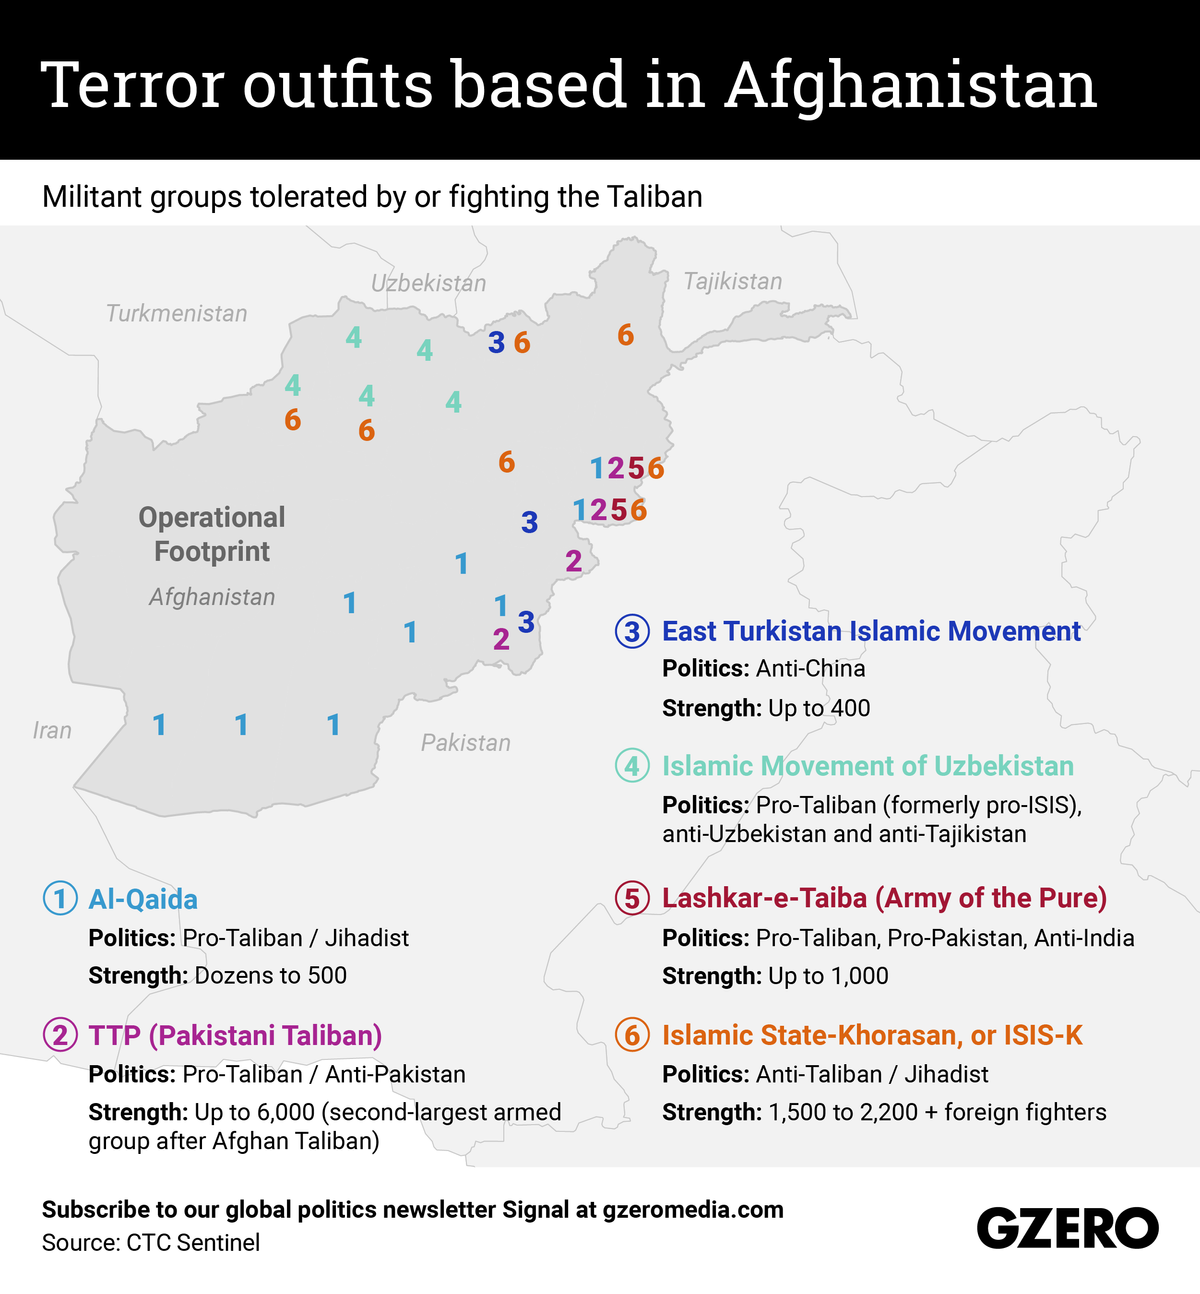 The Graphic Truth: Terror outfits based in Afghanistan